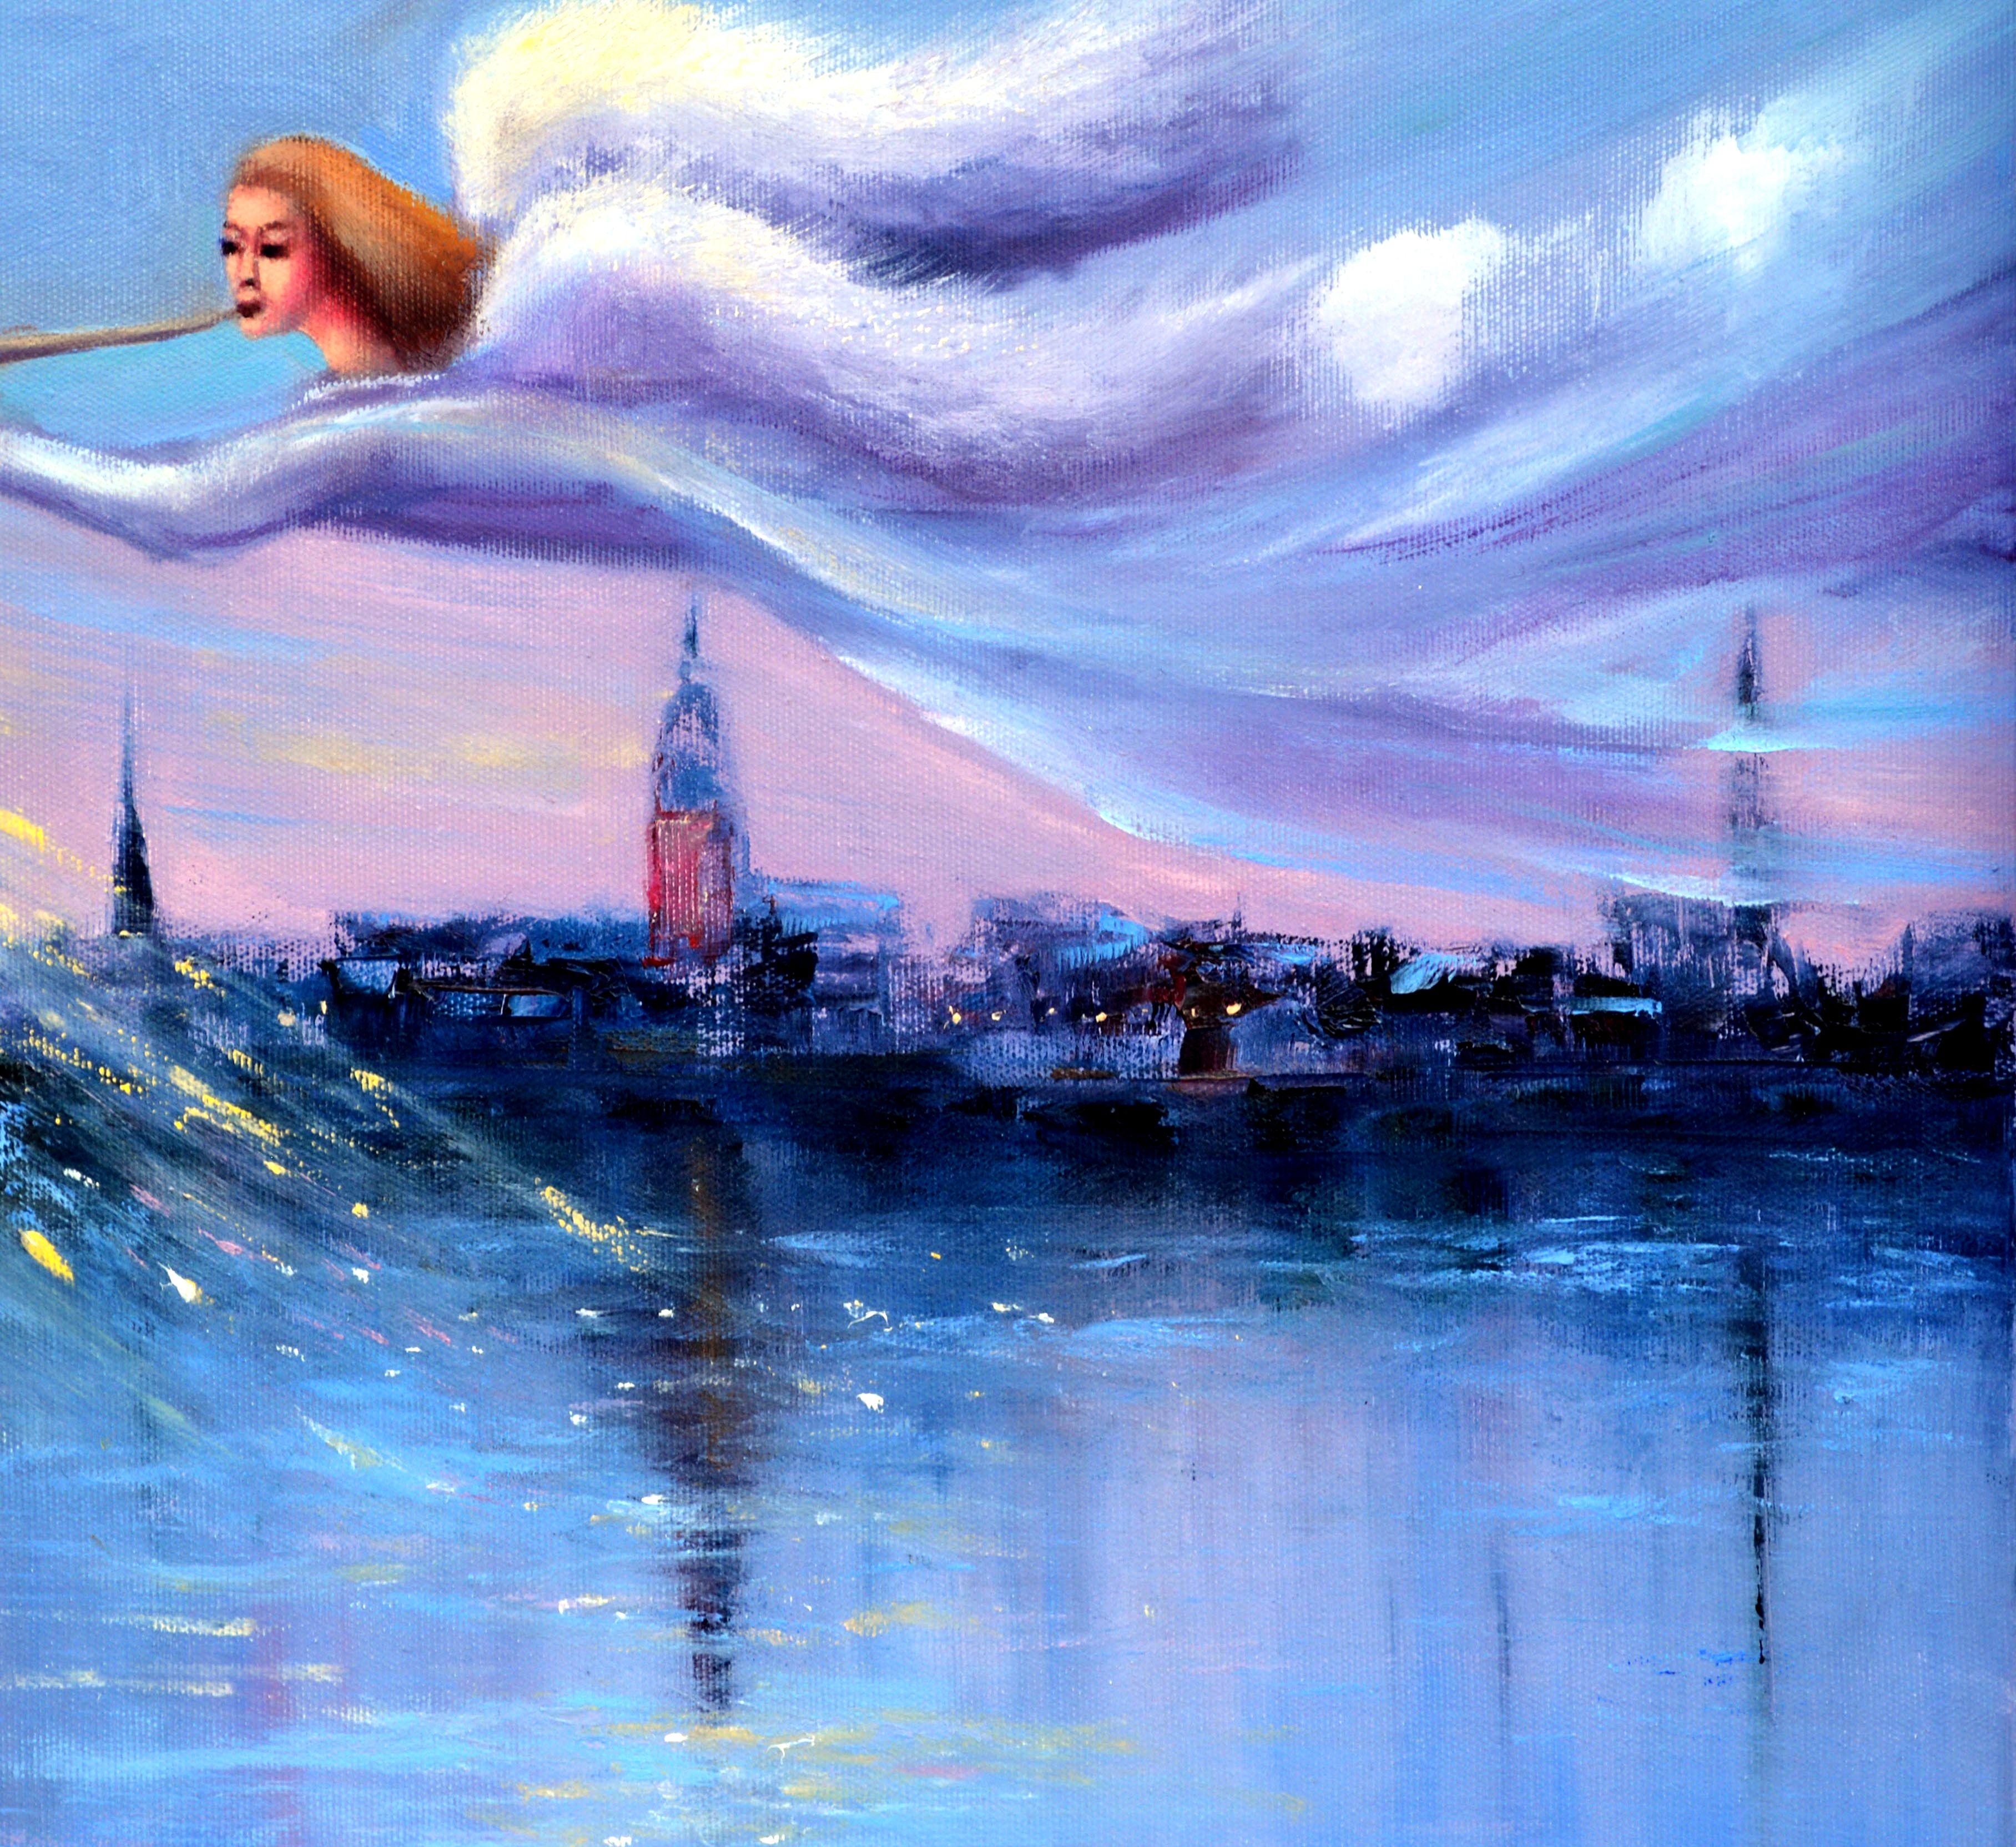 In this oil painting, I channeled expressionistic energy to capture a guardian of the urban expanse. Her elongated form, draped in ethereal fabric, glides over the cityscape, showering it with a cascade of stars. This act, both nurturing and